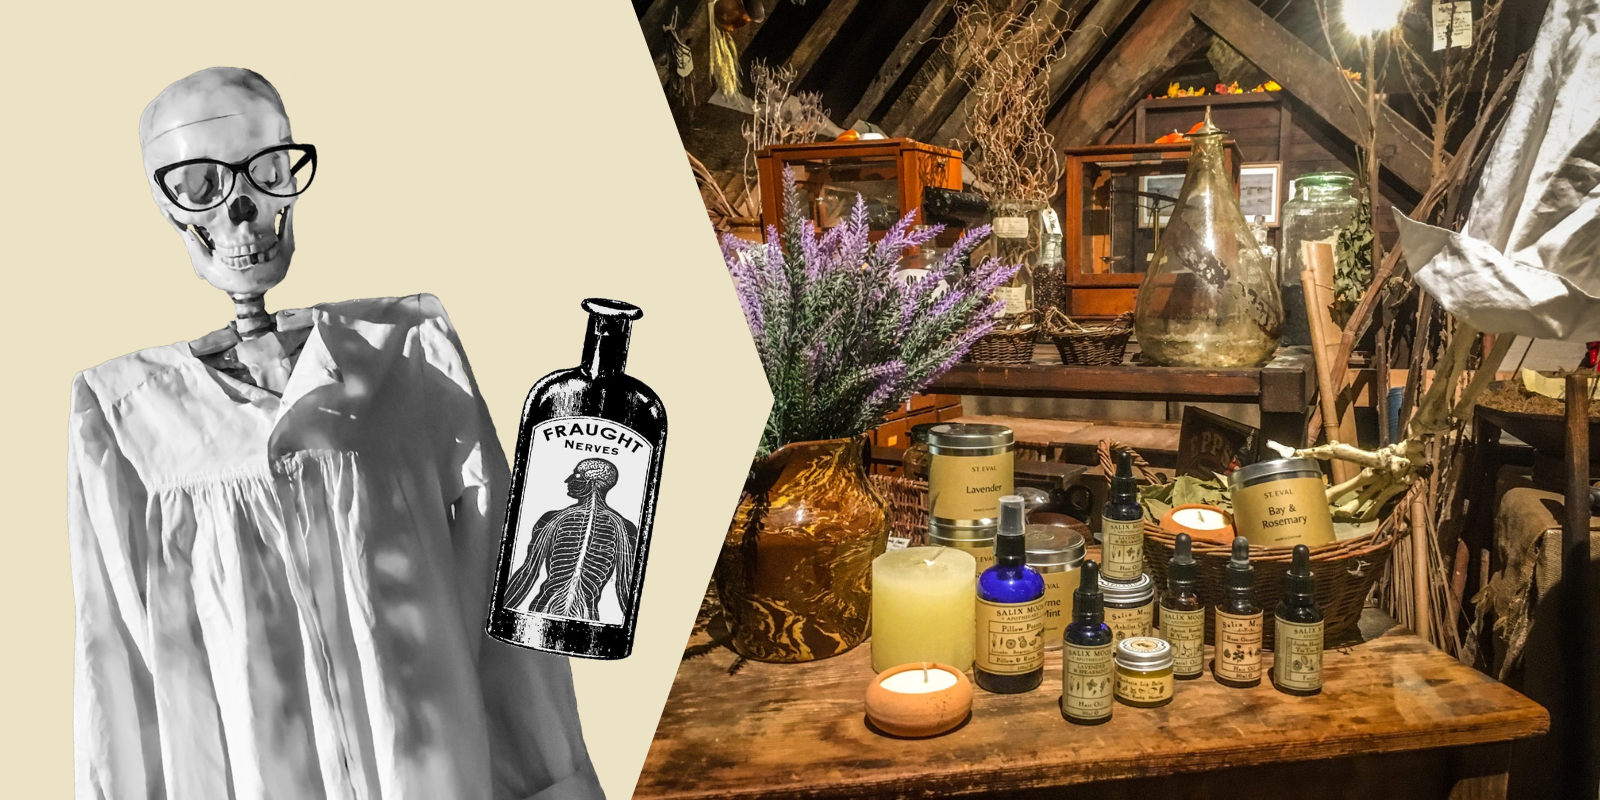 Left: a cut-out black-and-white photo of a skeleton wearing glasses and a gown, next to an illustrated bottle labelled Fraught Nerves. Right: a colour photo of products including candles, botanical skin oils, and lip balms, on a wooden table, surrounded by herbs in pots and baskets in the museum